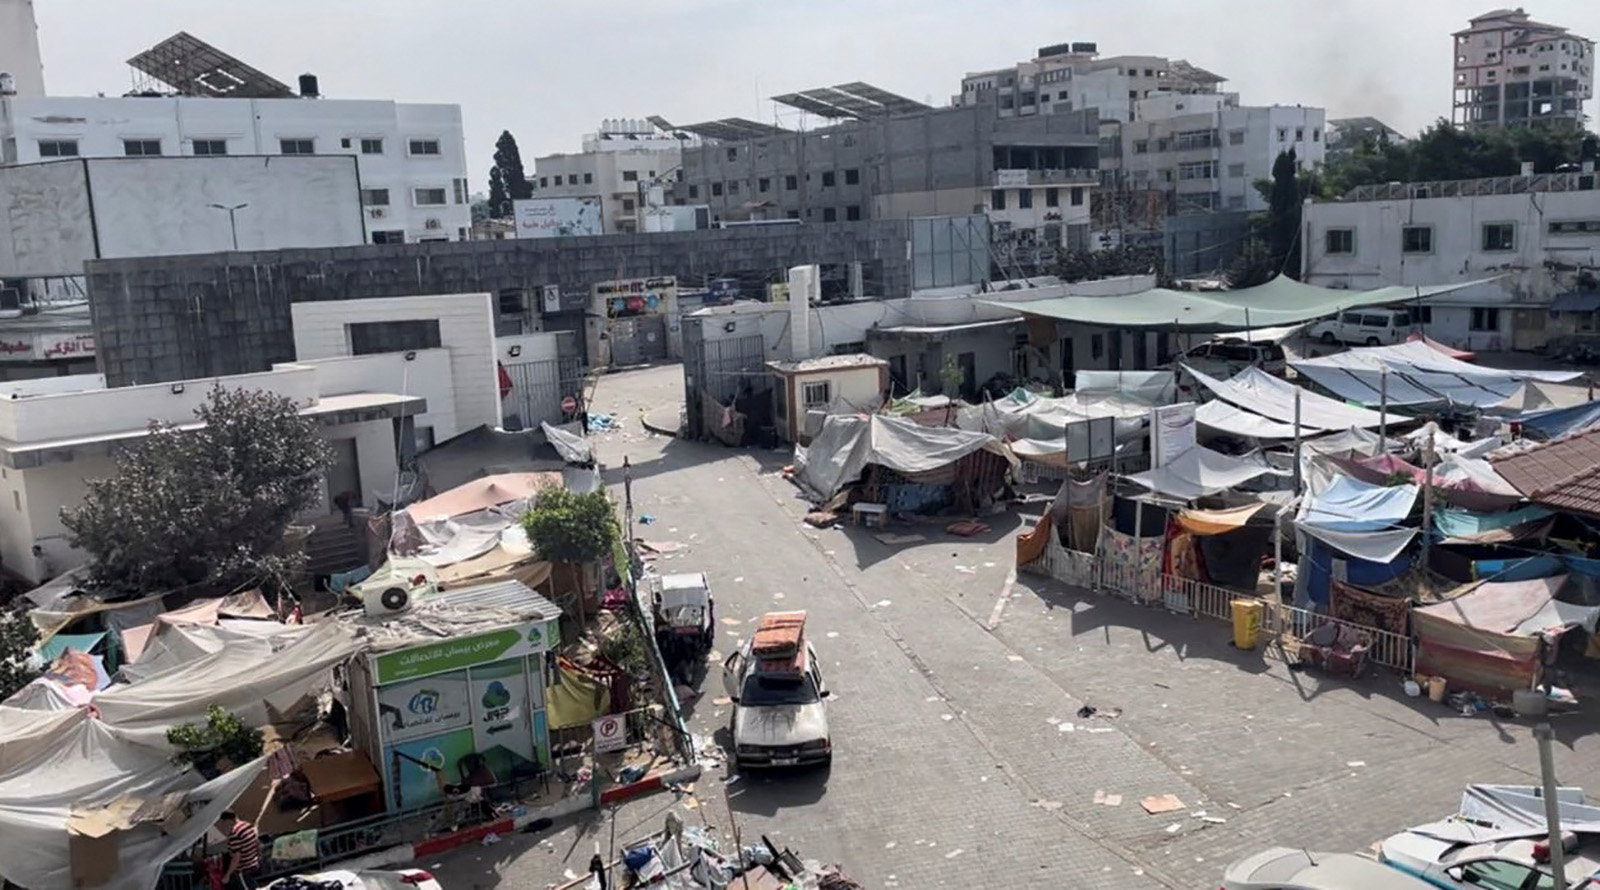 Tents and shelters stand at the yard of Al Shifa hospital in Gaza on November 12.